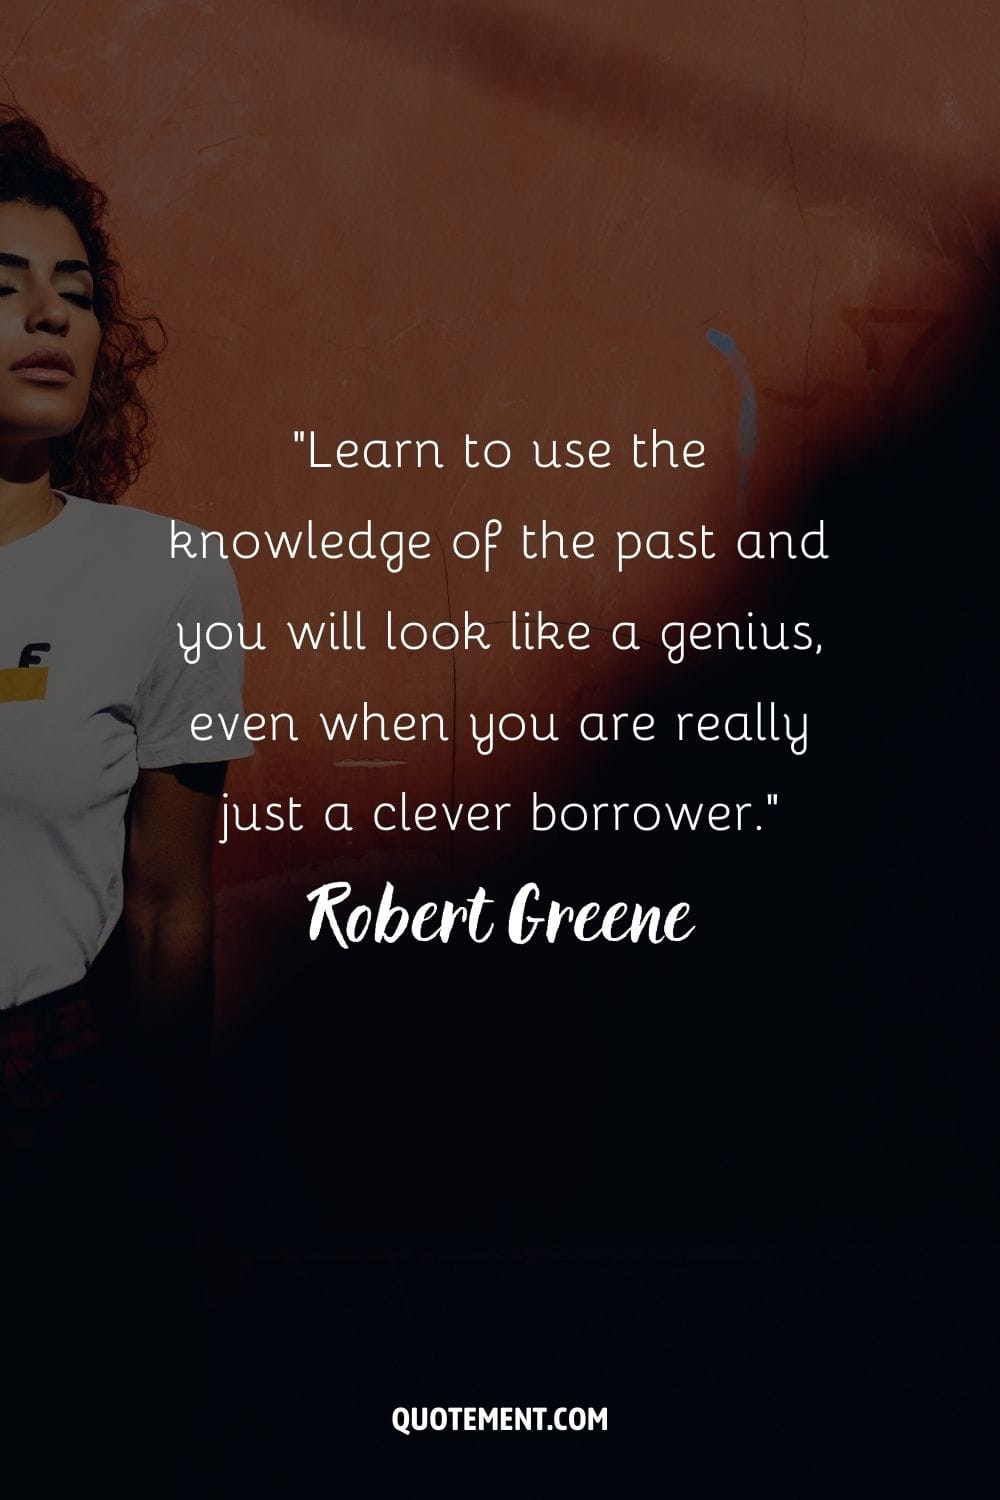 “Learn to use the knowledge of the past and you will look like a genius, even when you are really just a clever borrower.” ― Robert Greene, The 48 Laws of Power